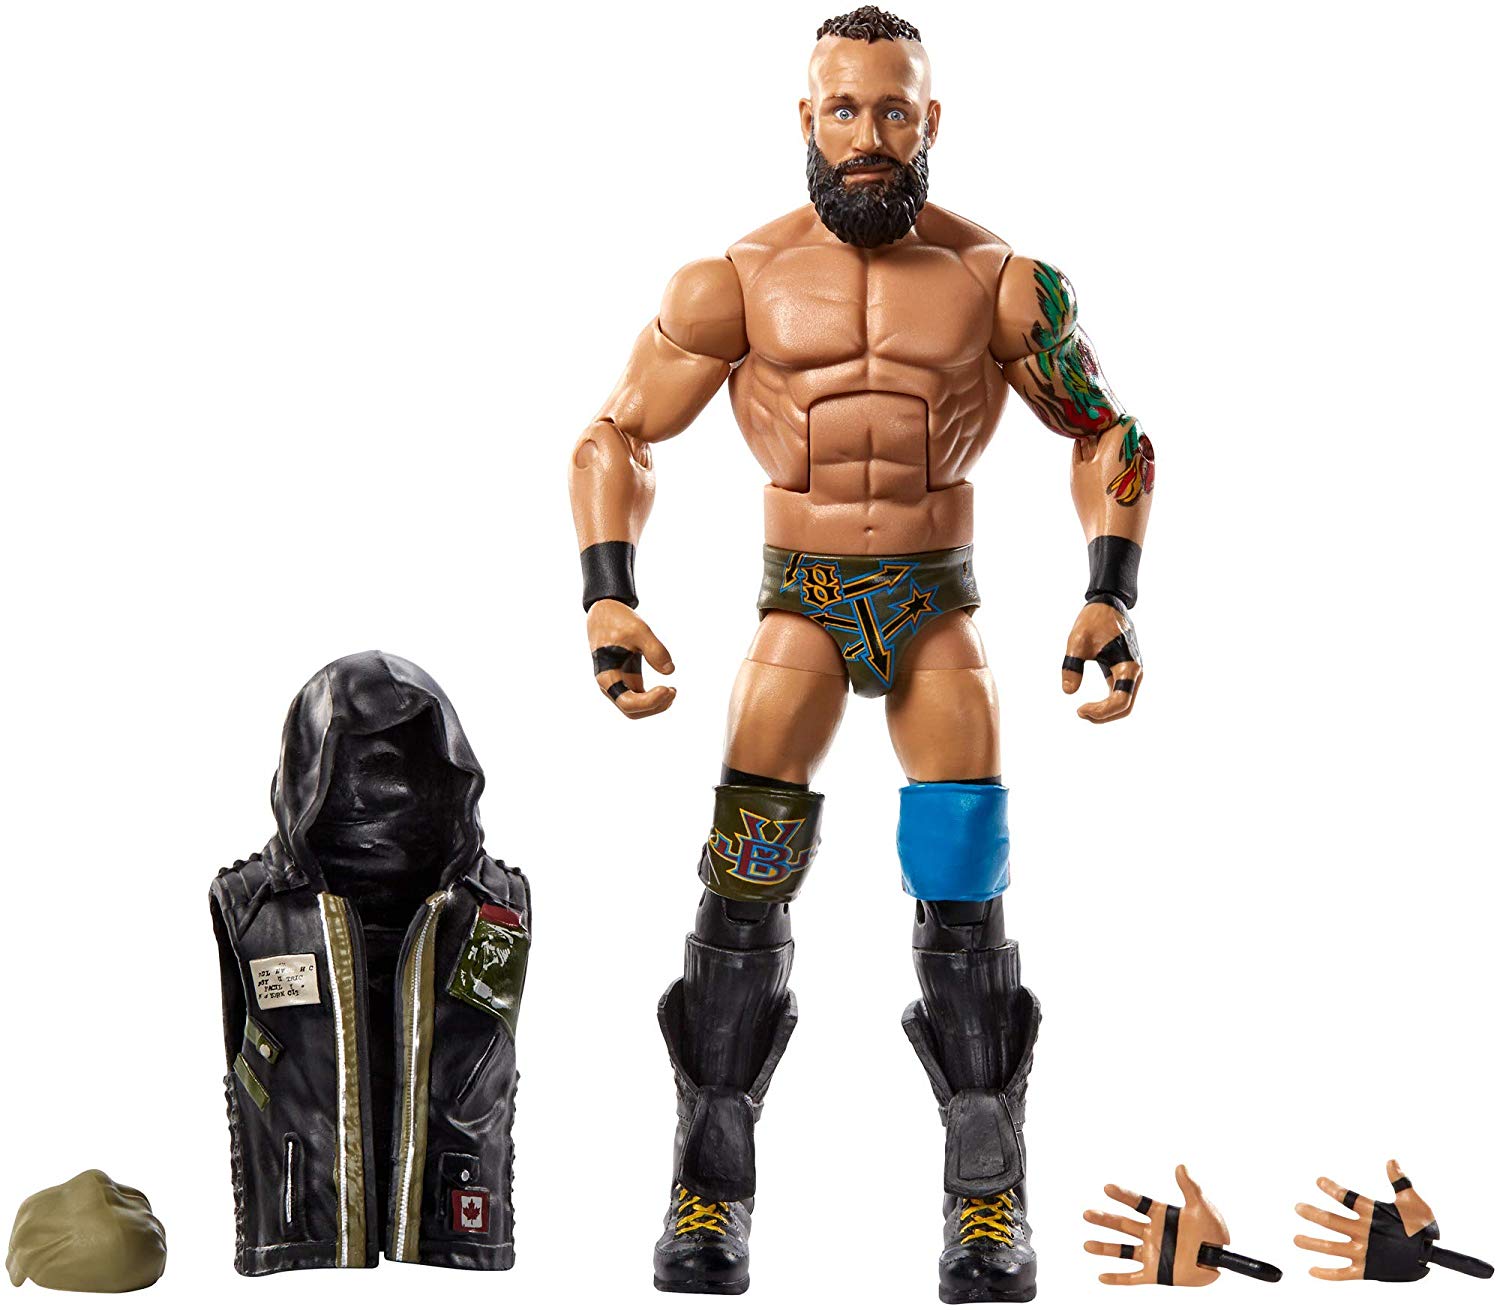 WWE GCL30 Elite Collection Deluxe Action Figure with Realistic Facial ... - 71yEouEluLL. SL1500 